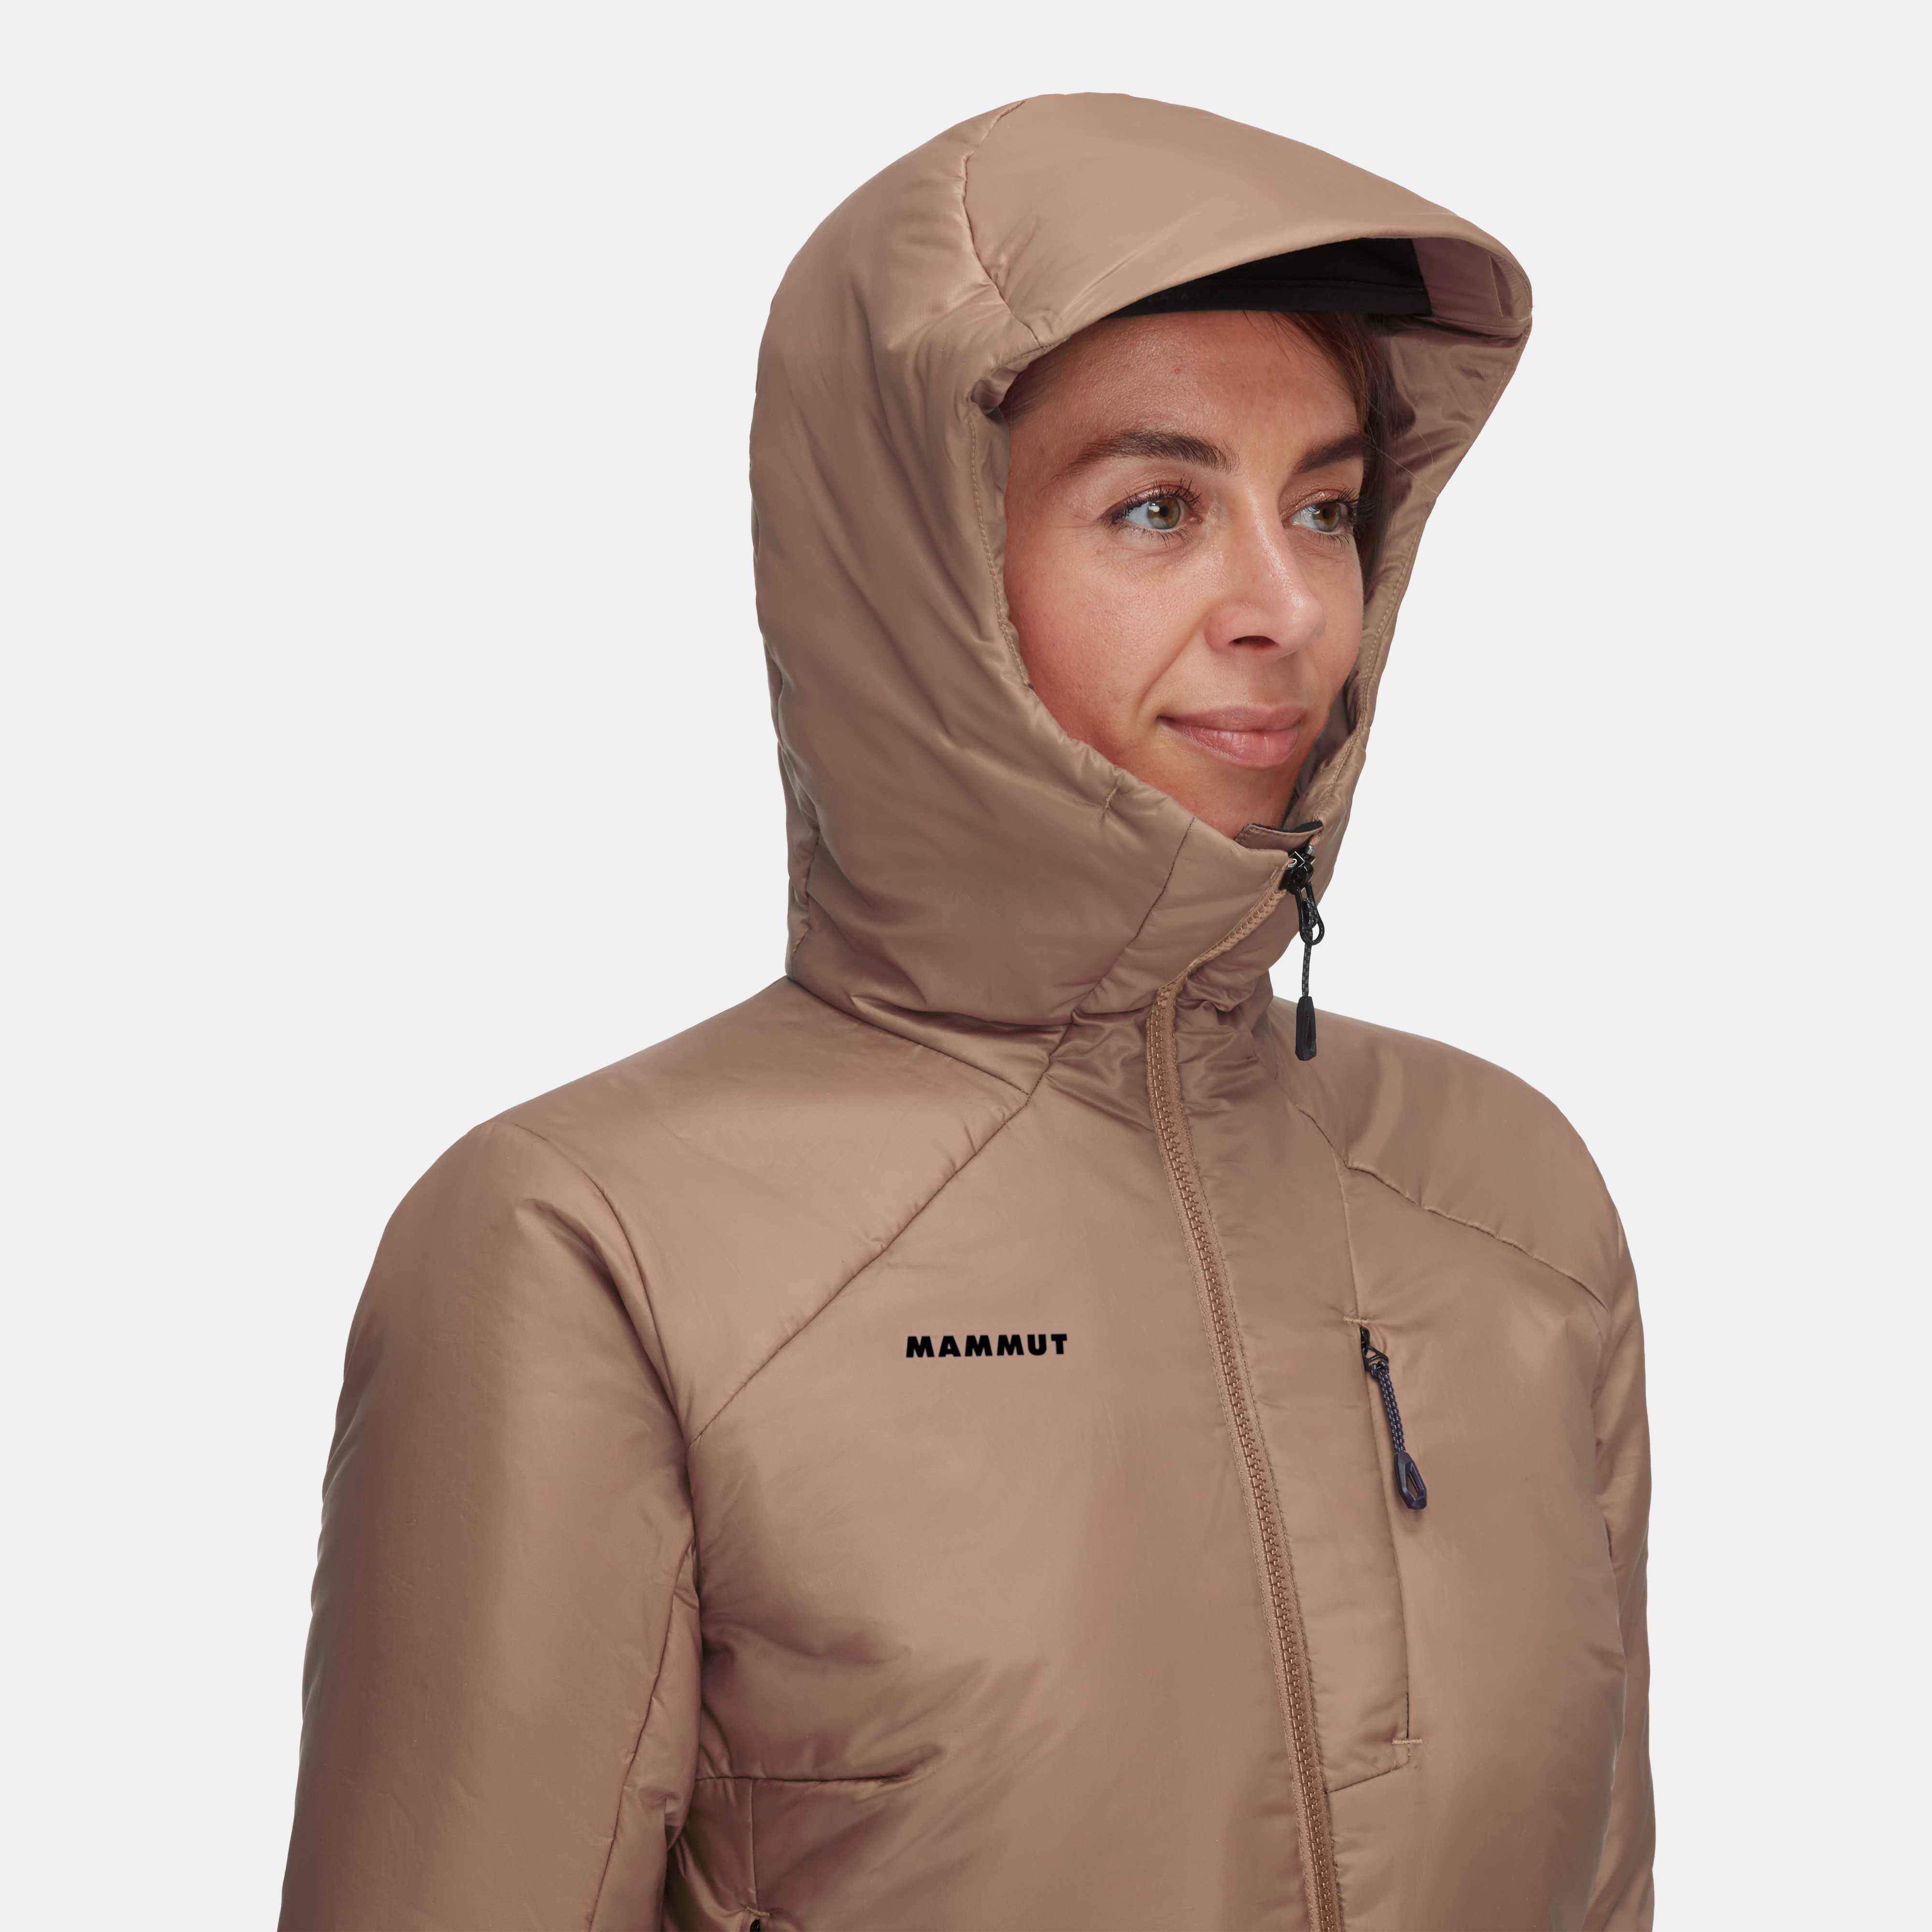 Mammut The Extraordinary Insulation Jacket with Synthetic Fibers x Nespresso in Flex Hooded Jacket Women M